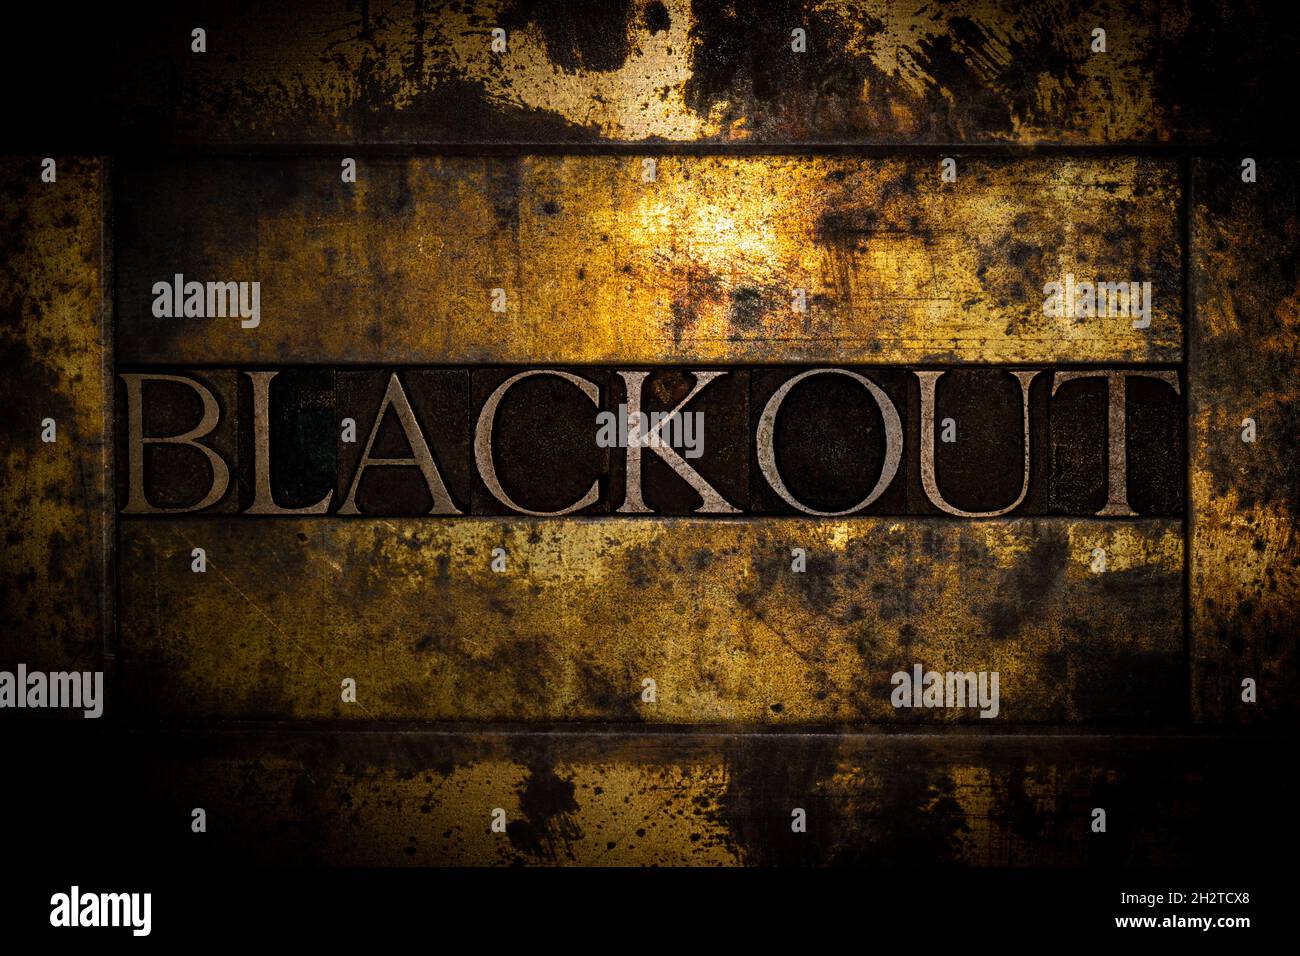 Blackout text on textured grunge copper and vintage gold background Stock Photo